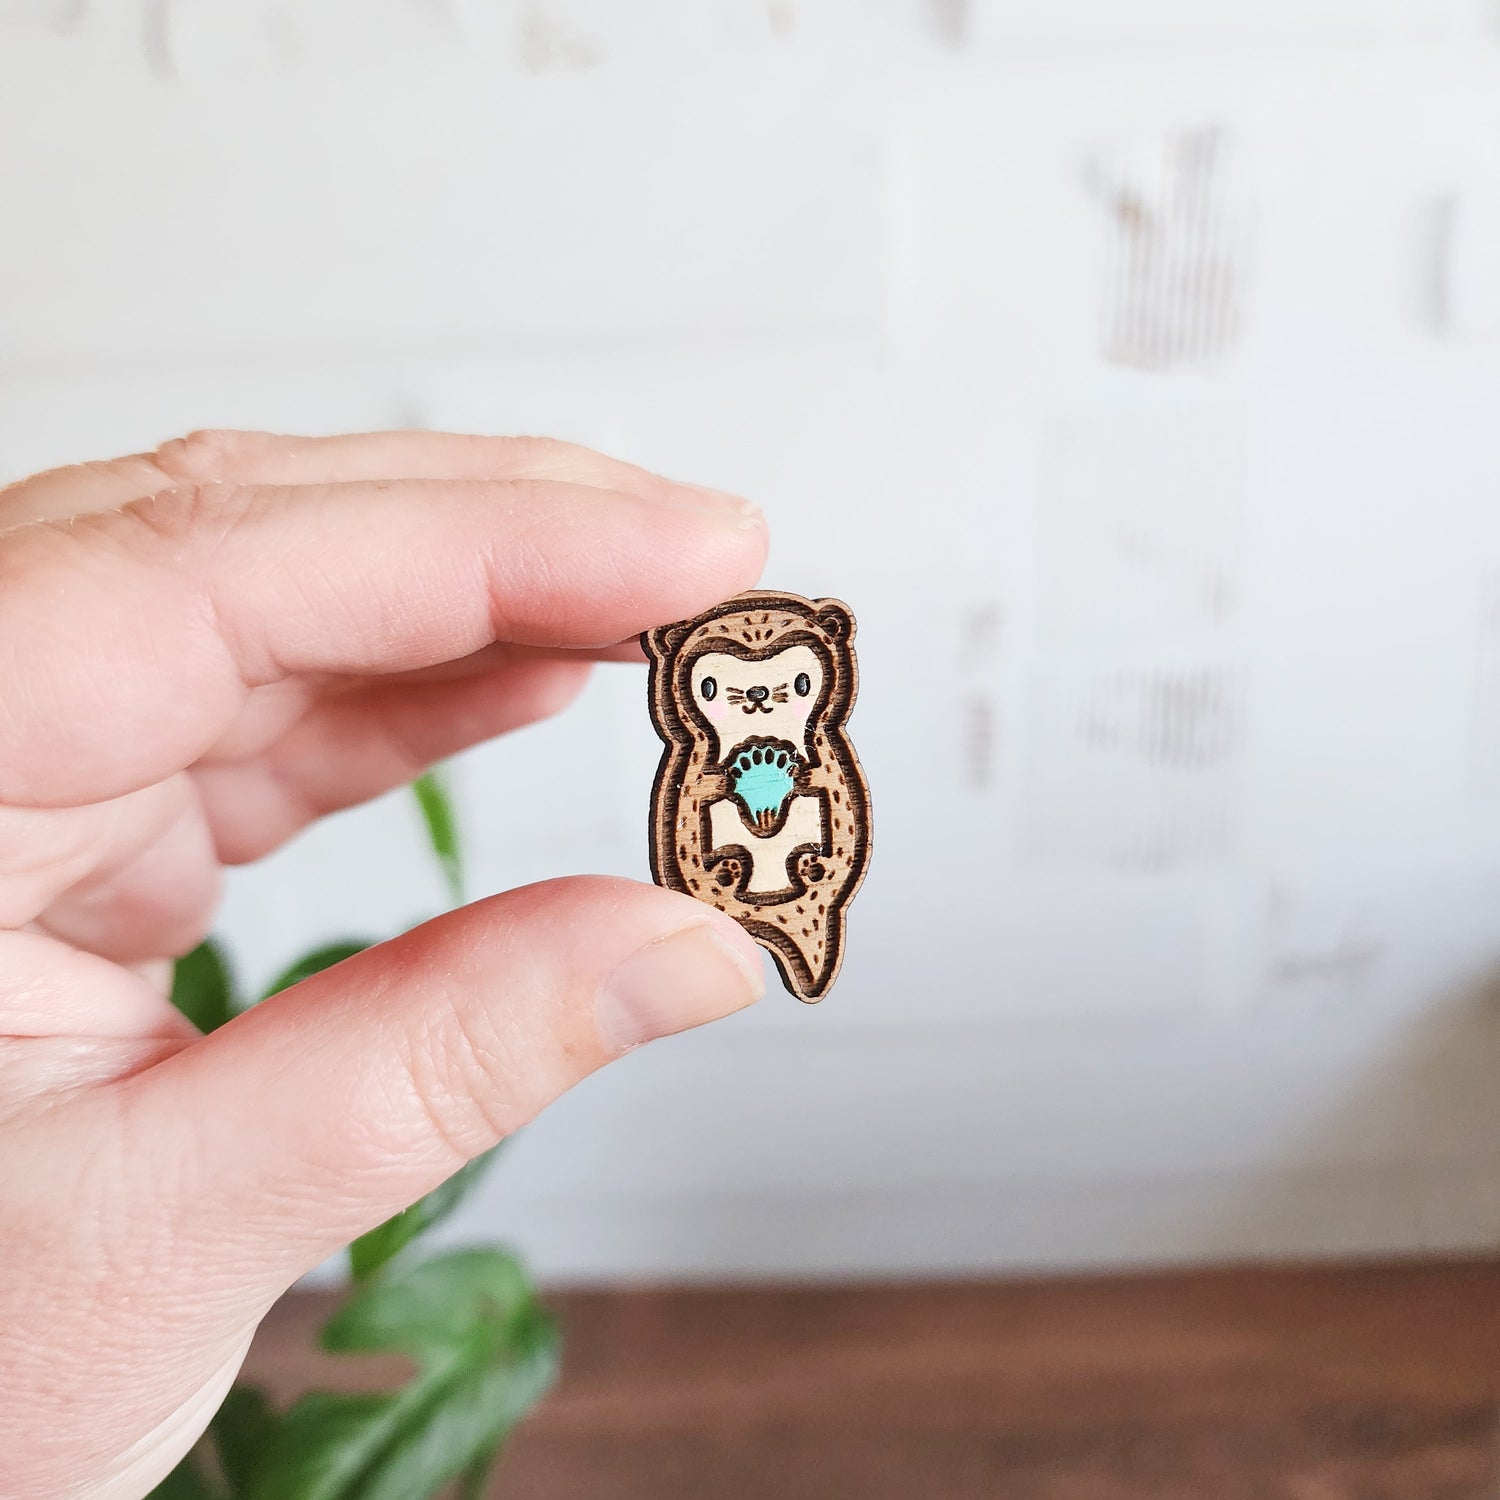 wooden otter pin held between two fingers